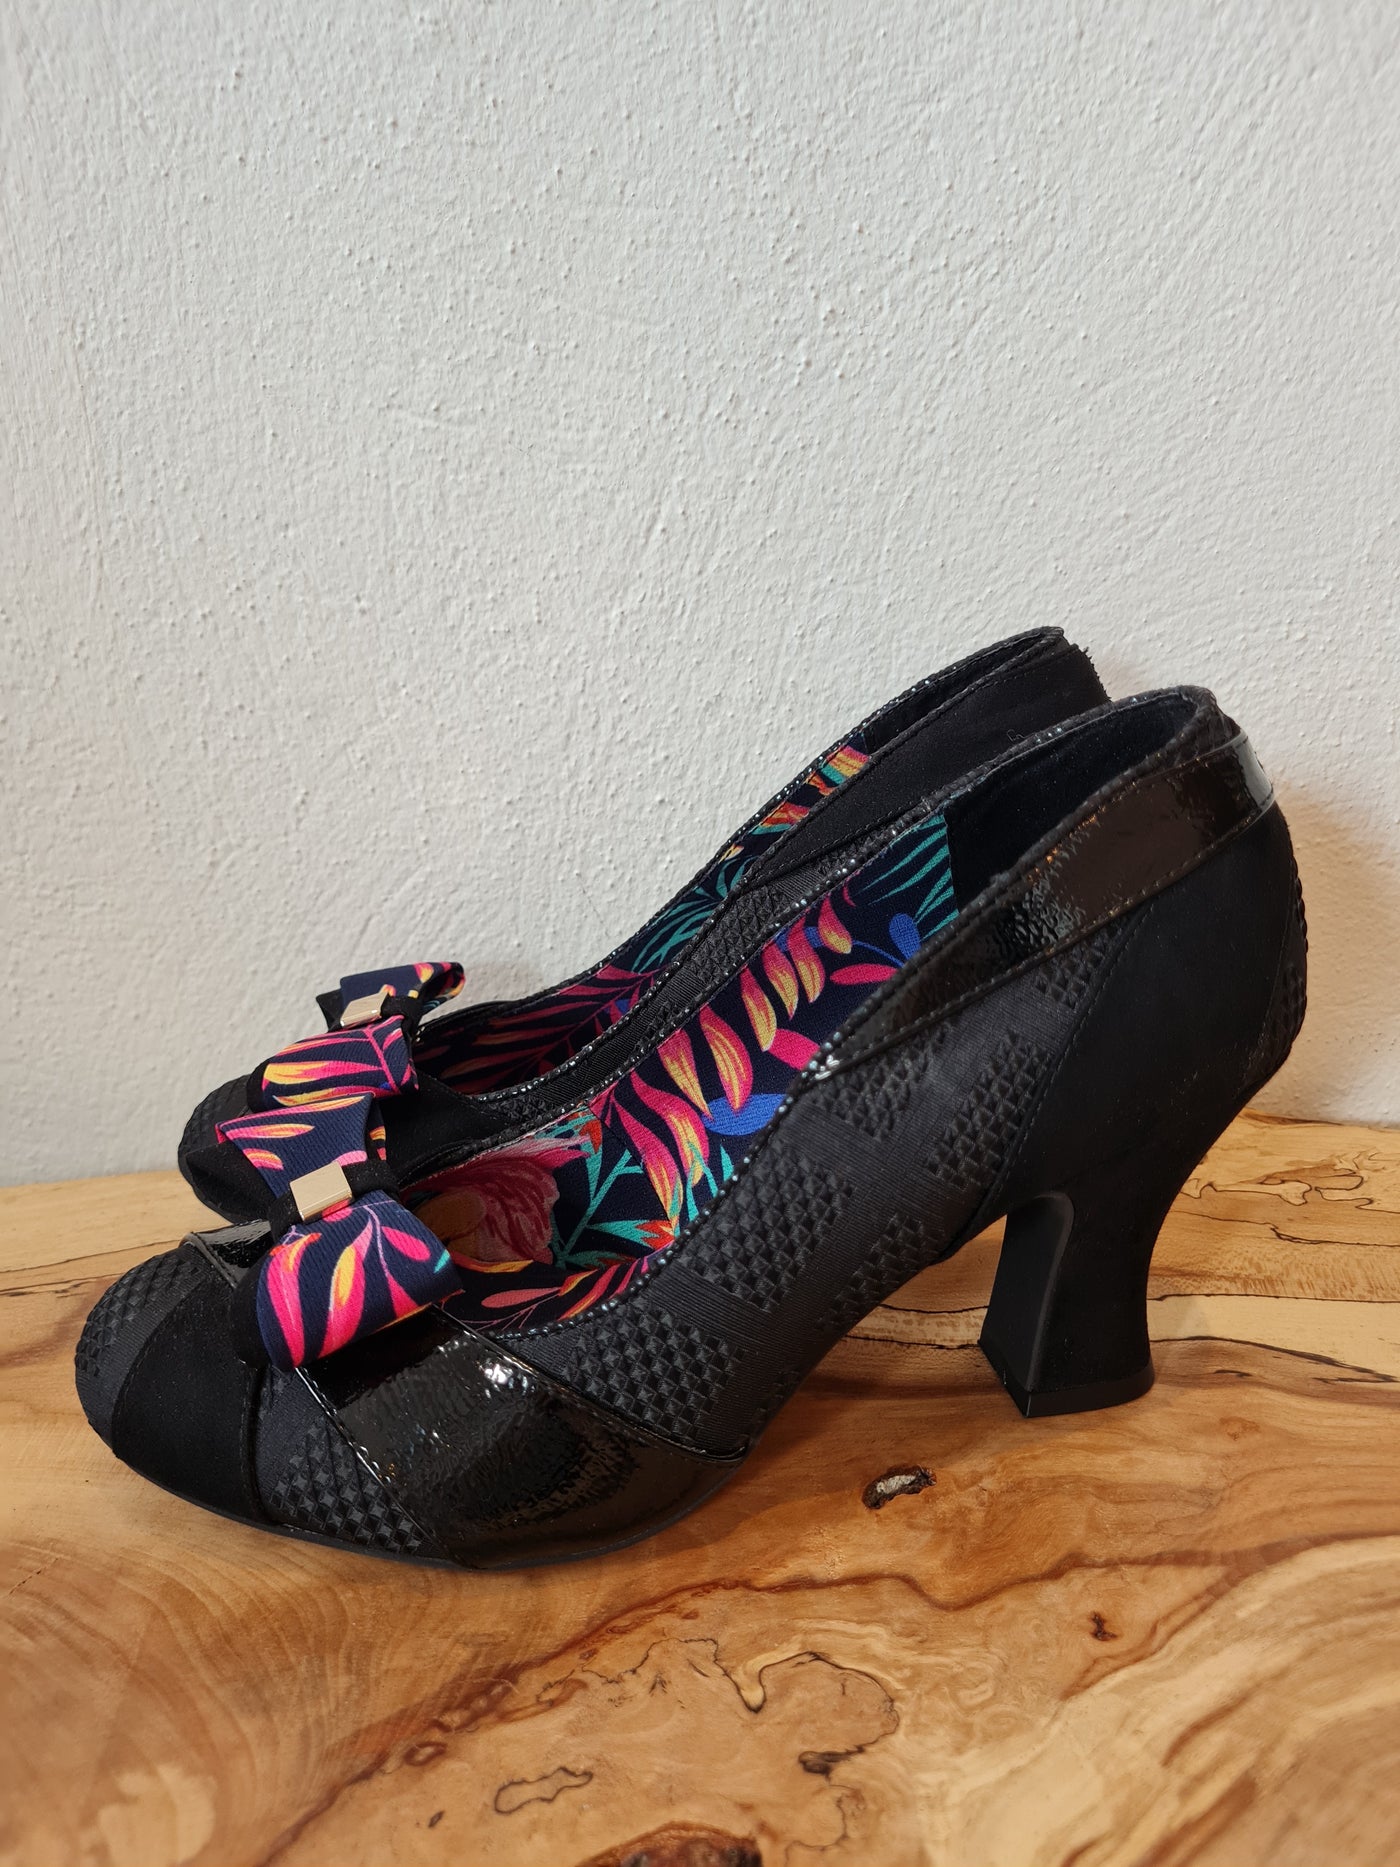 Ruby Shoo Black Bow Shoes Size 7